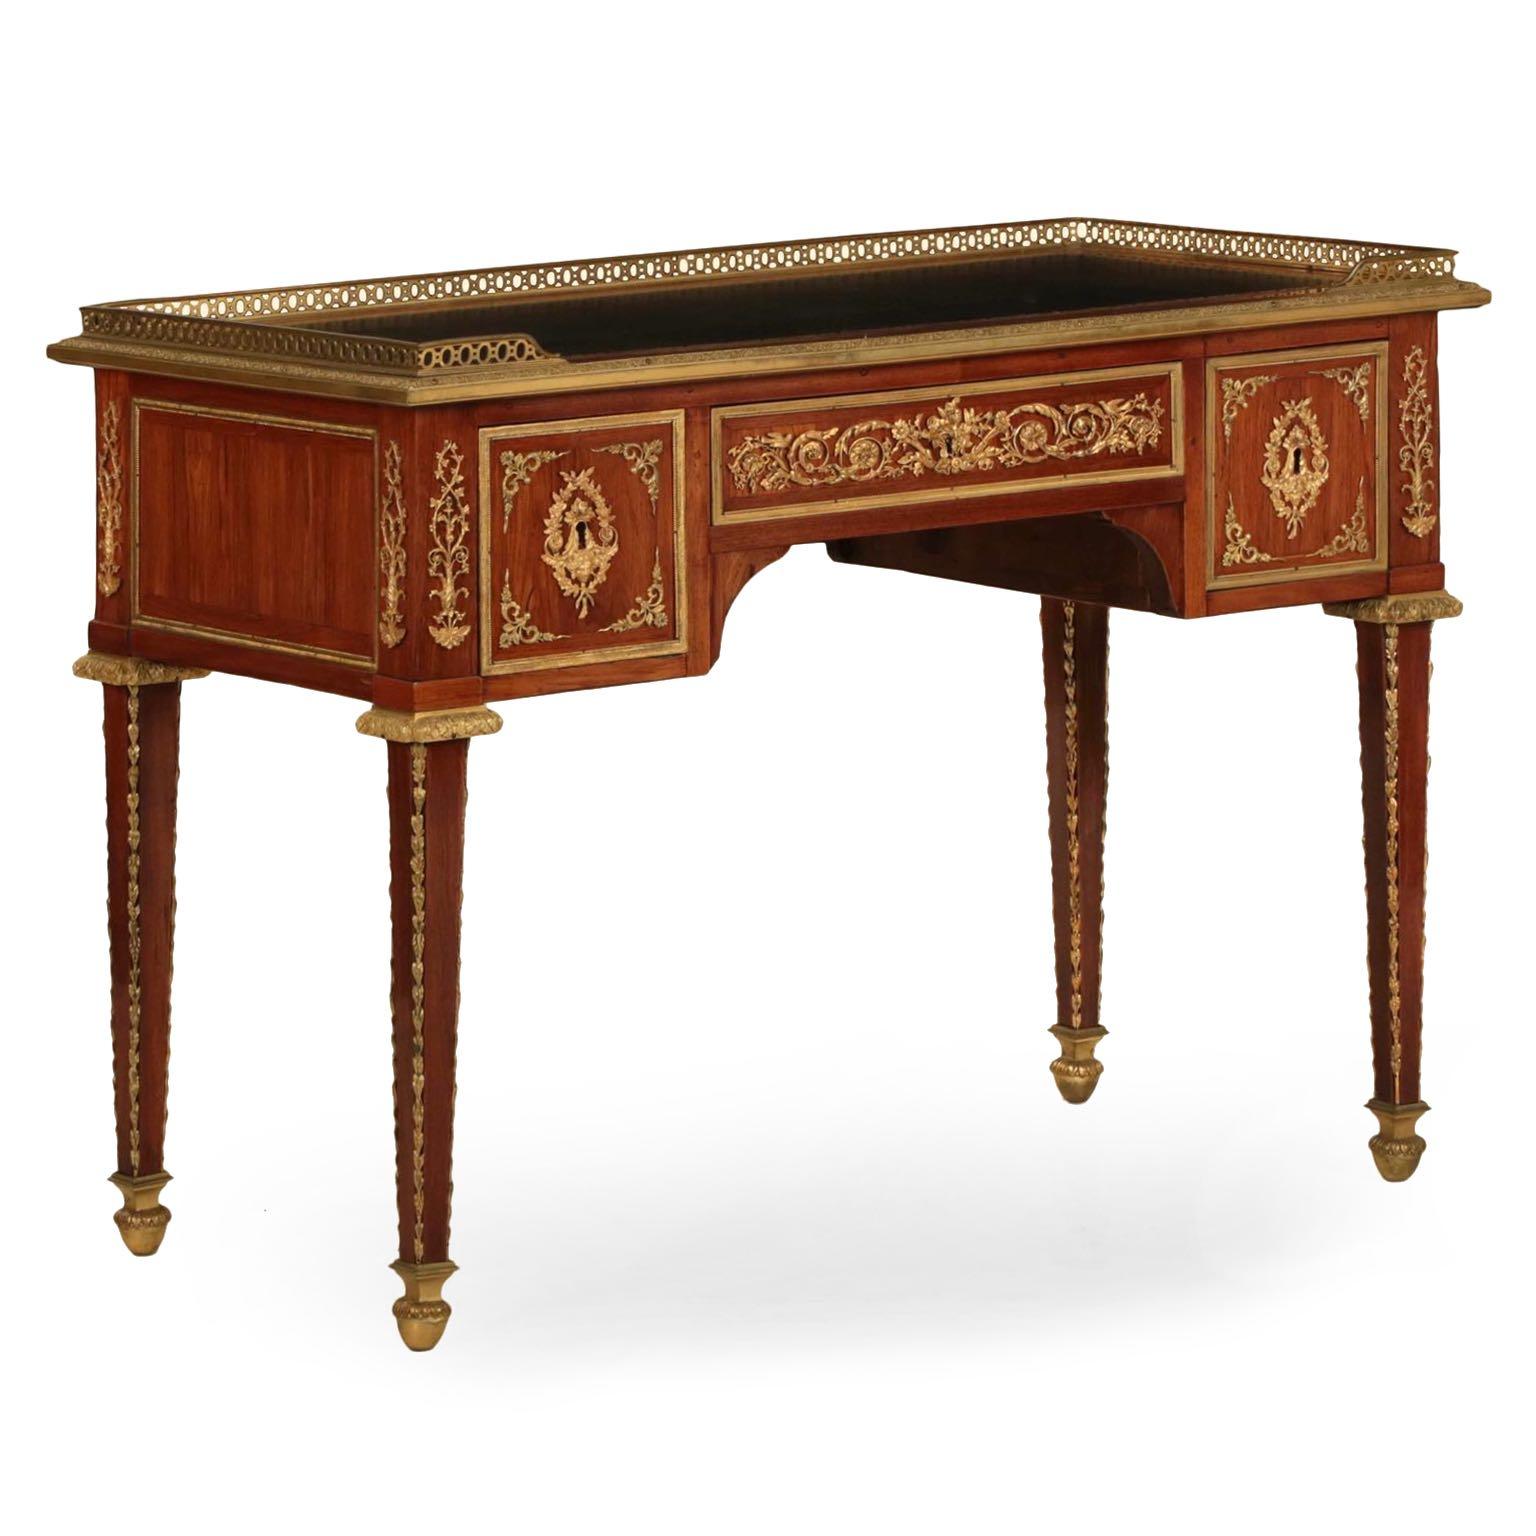 This very fine French writing desk is inordinately rich the rosewood veneers utilized to dress the facade are most dramatic and are beautifully polished. The gilded bronze mounts contrast against the warm reds of the surface, each exquisitely